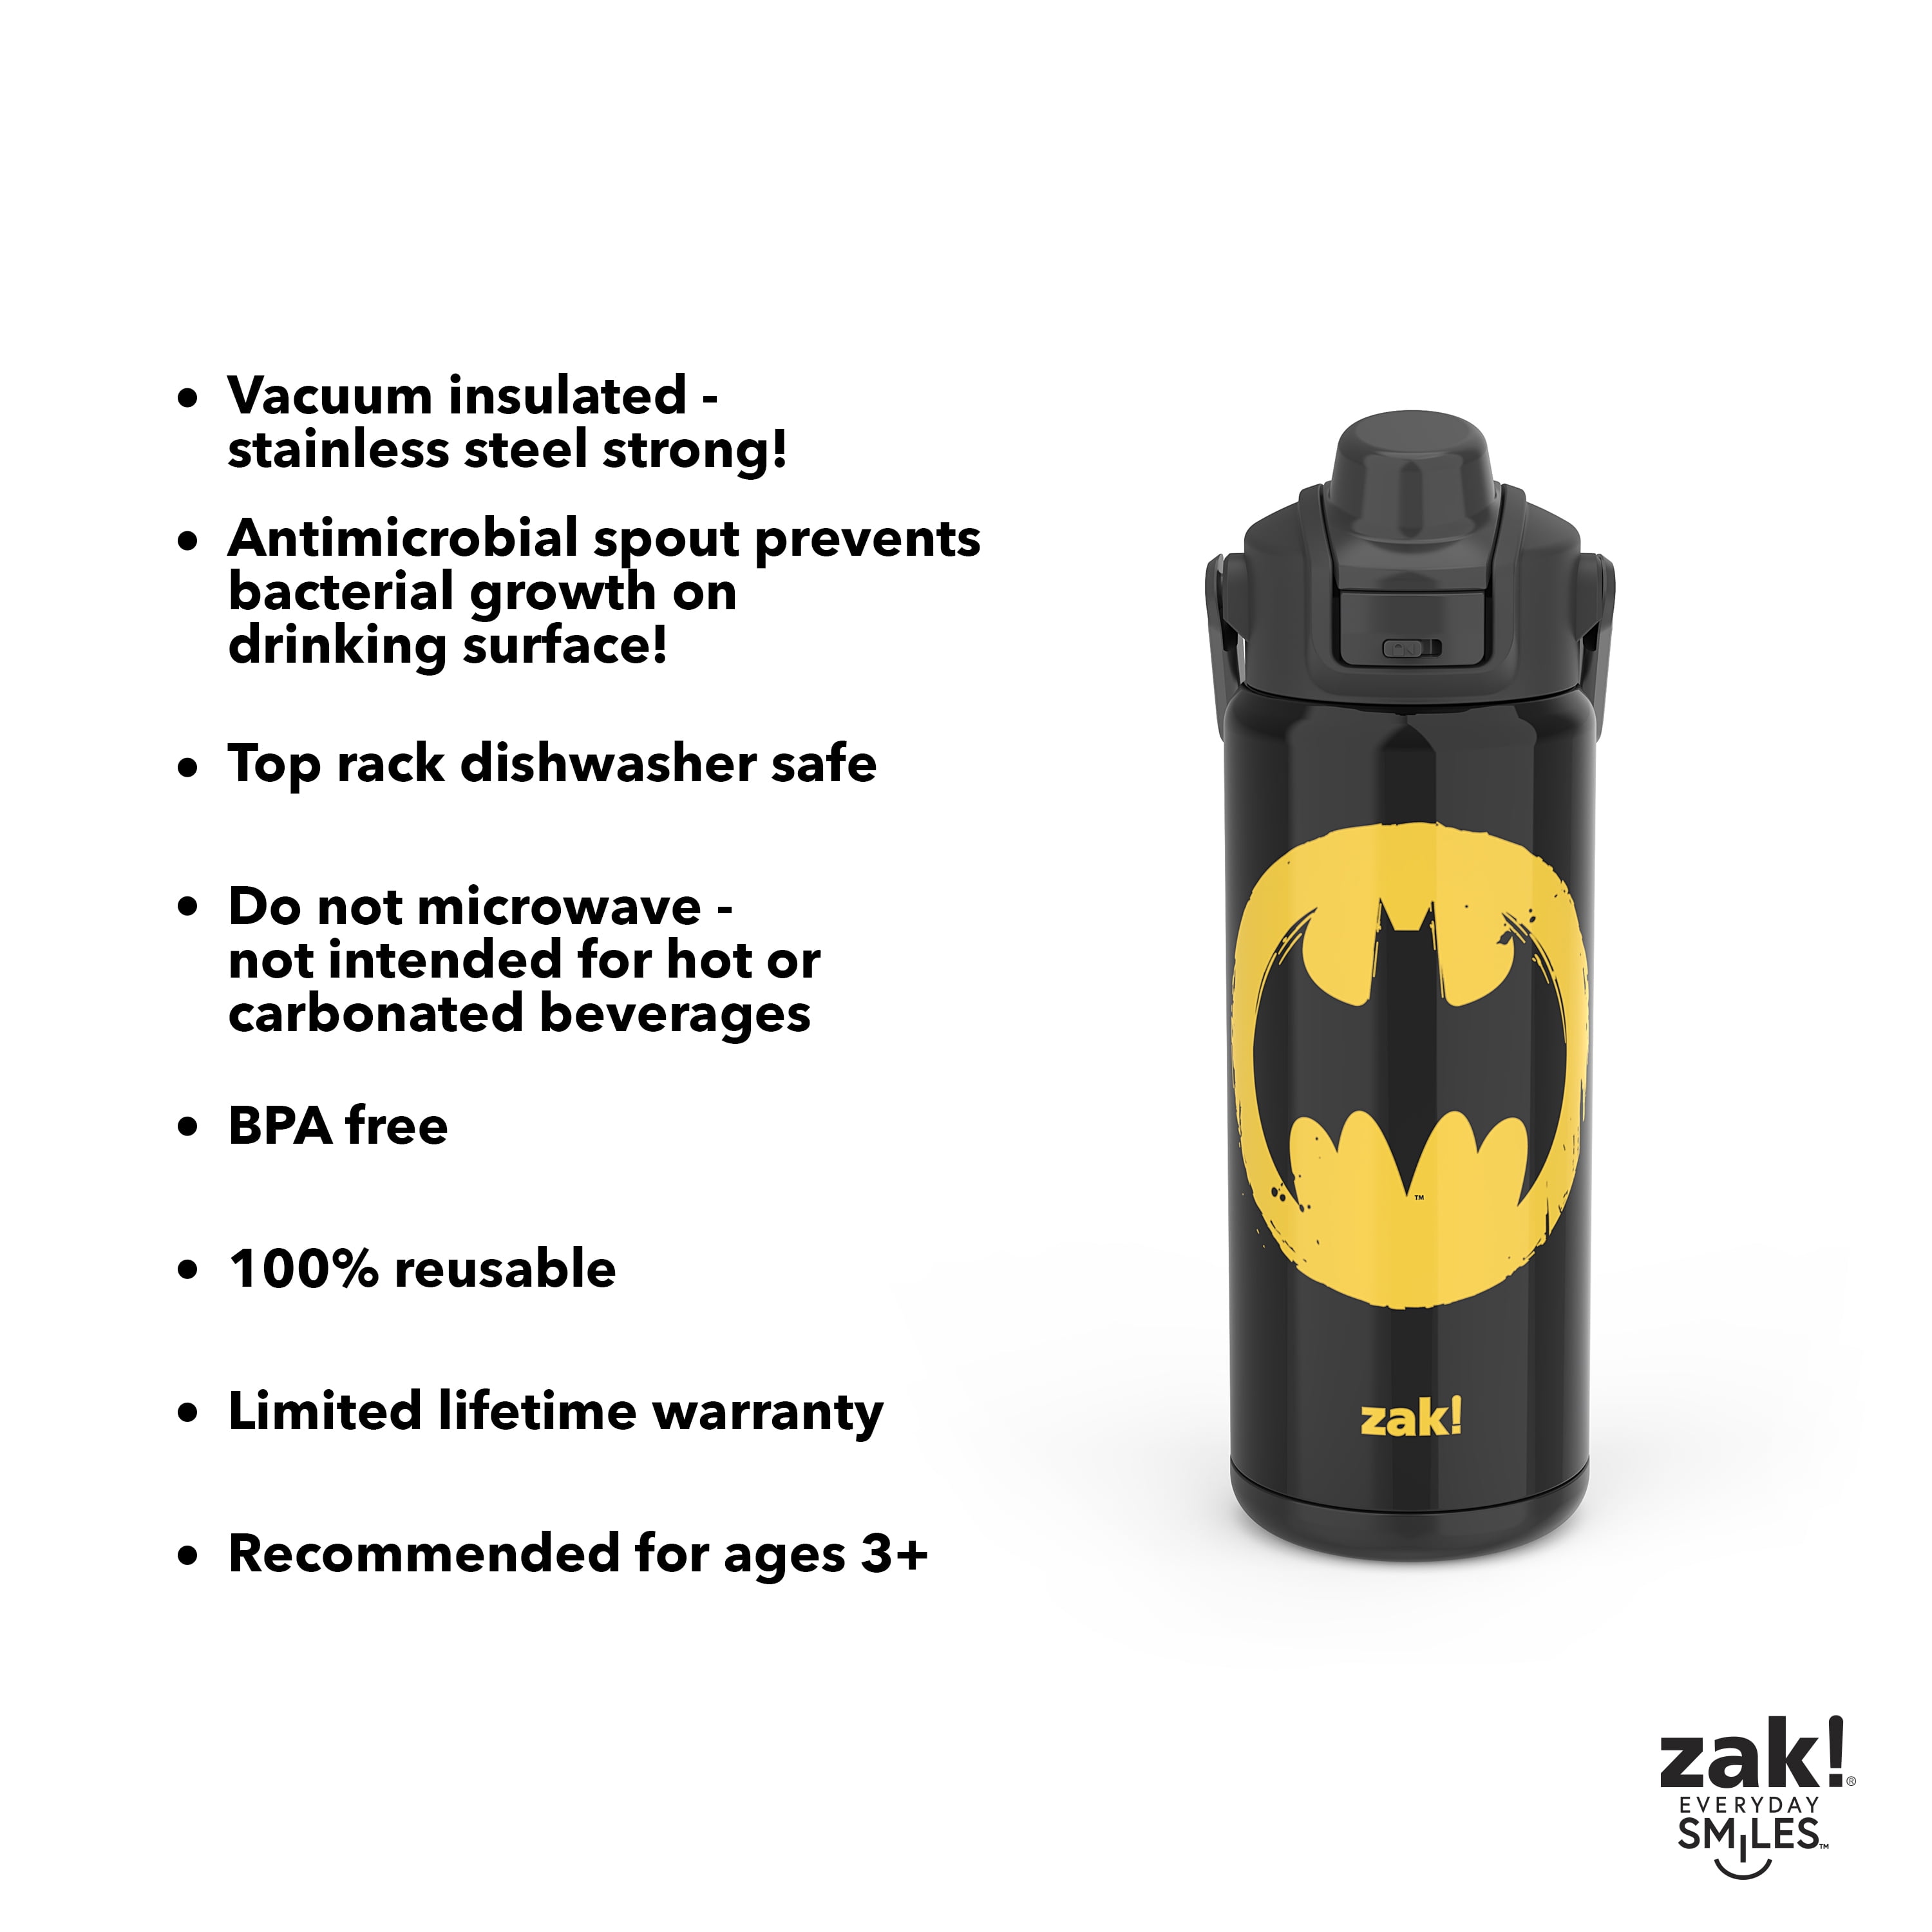 Save on Zak! Insulated Bottle Kionoa 20 oz Order Online Delivery